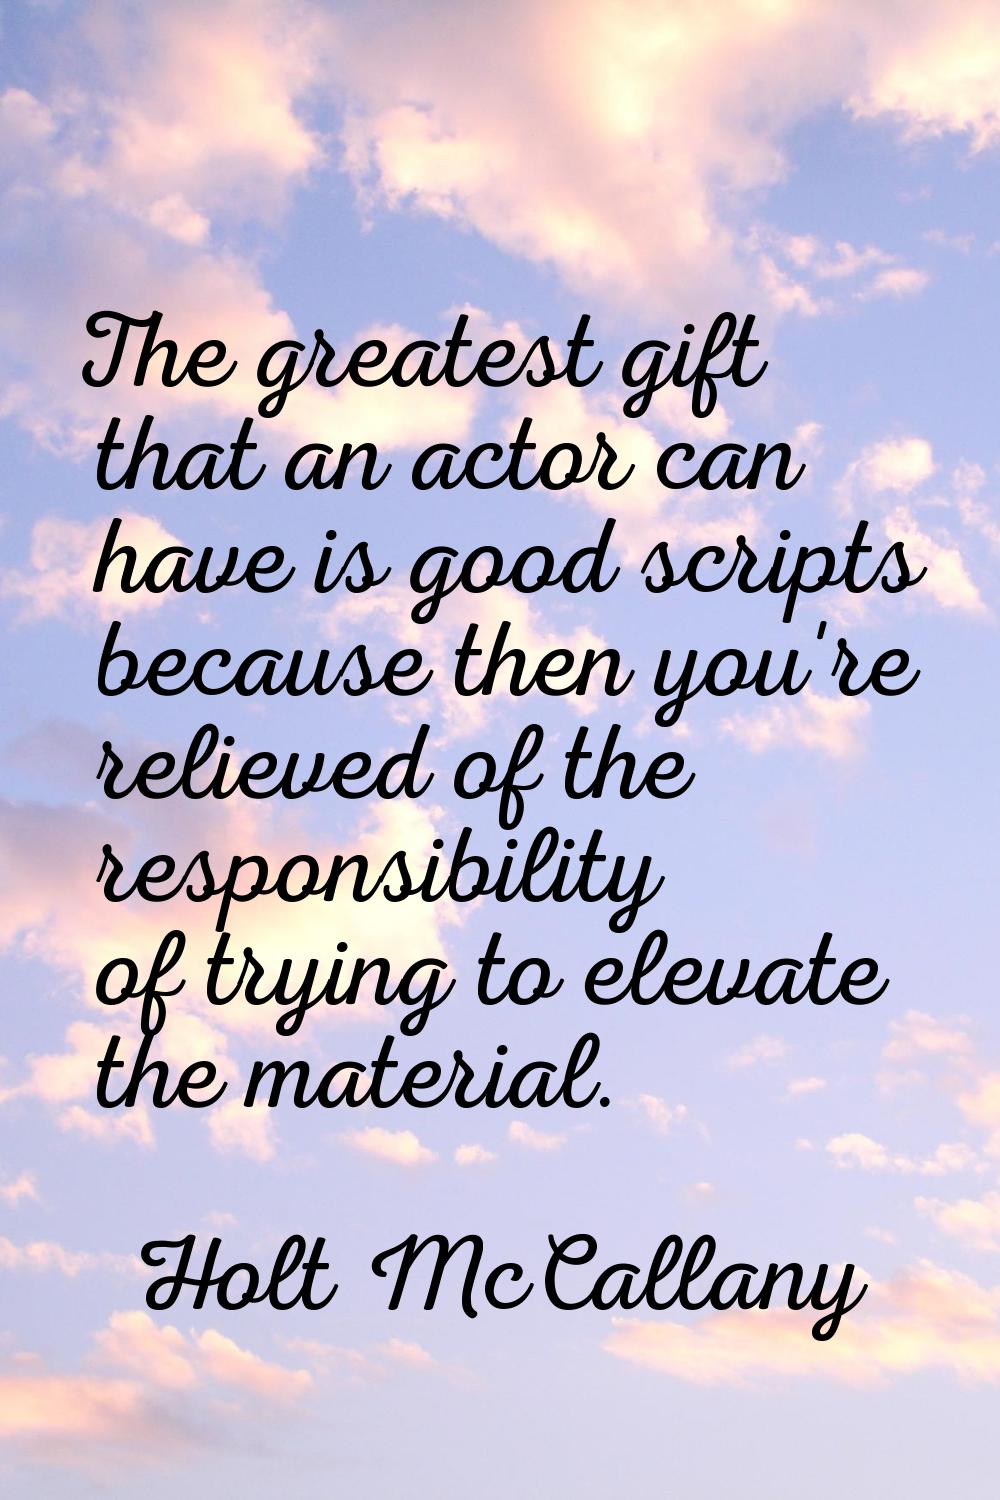 The greatest gift that an actor can have is good scripts because then you're relieved of the respon